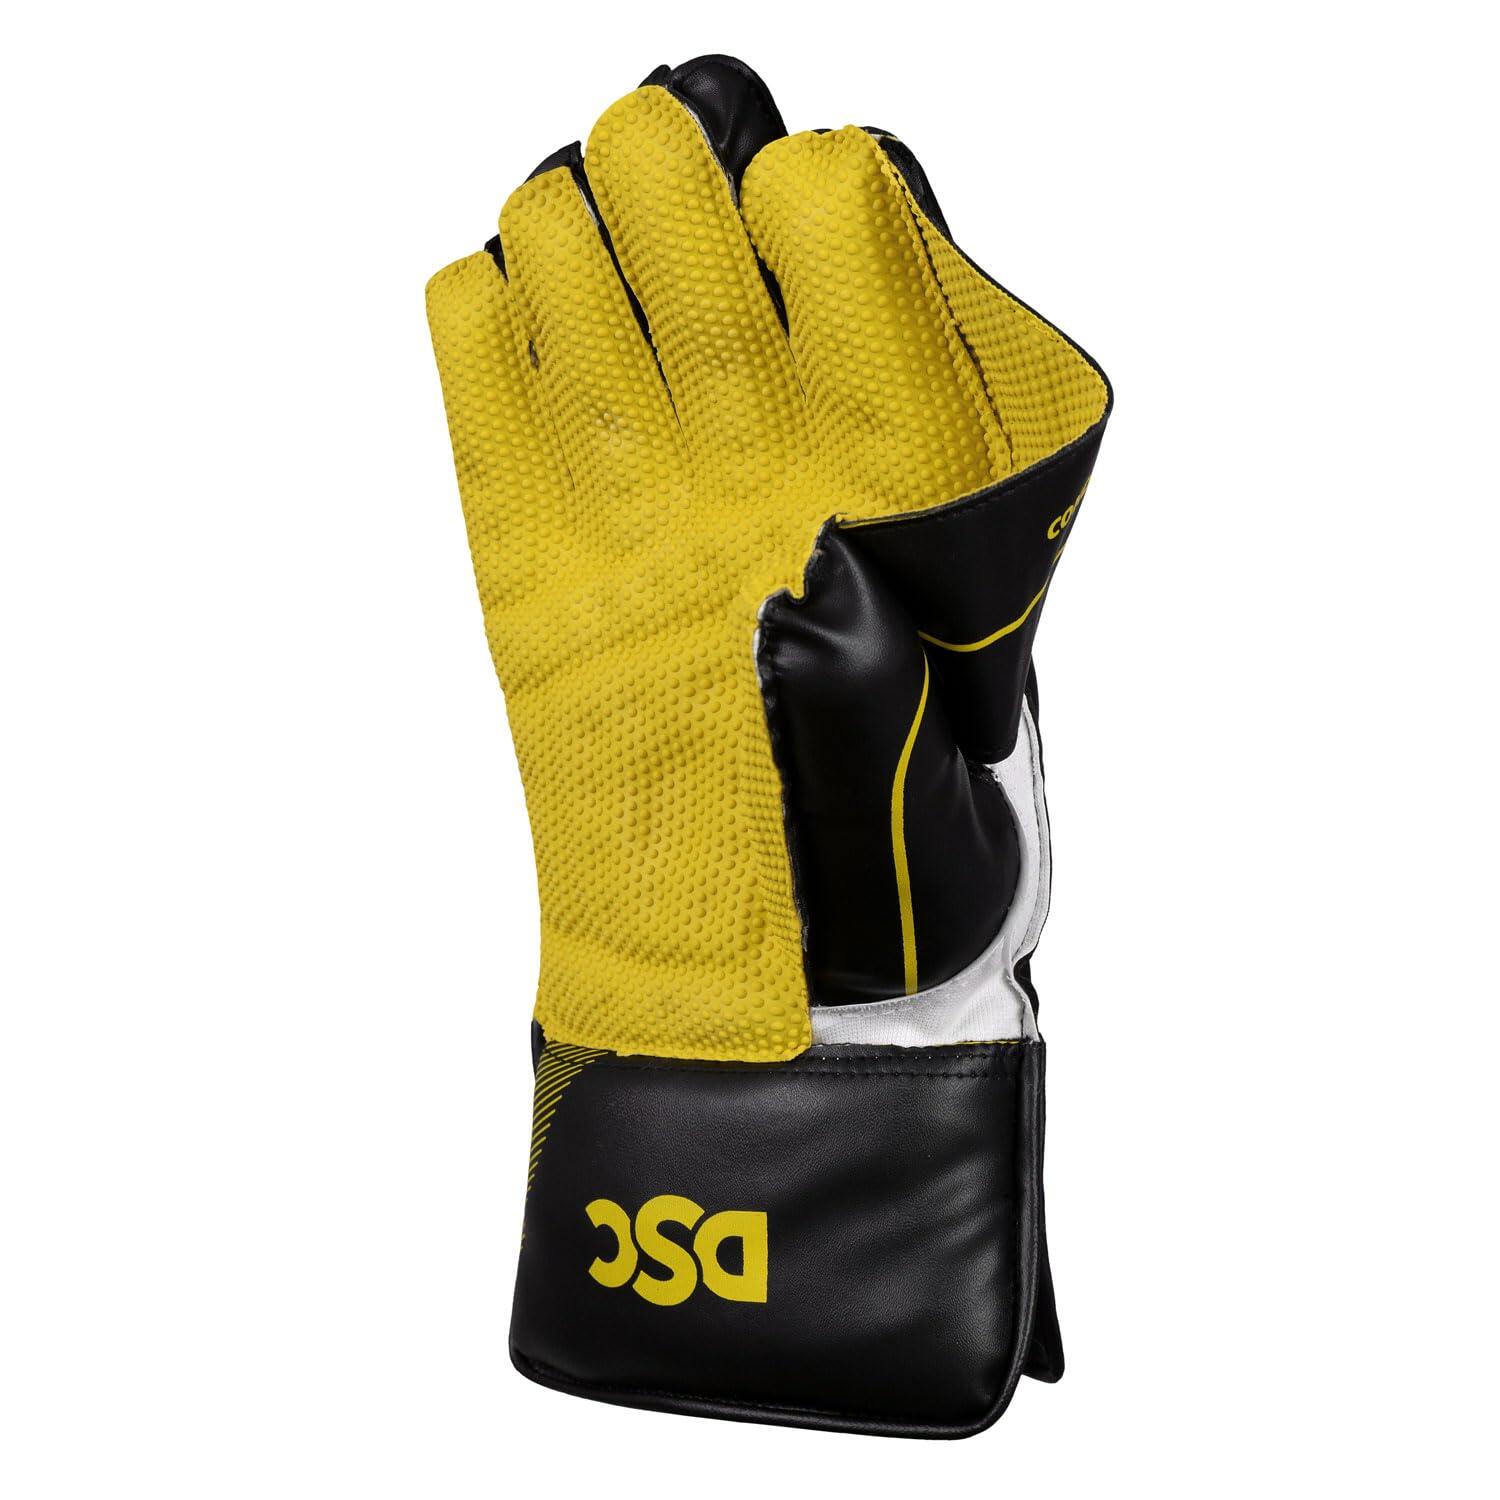 DSC Condor Ruffle Cricket Wicket Keeping Gloves | Material- Leather Ruffle 2/5